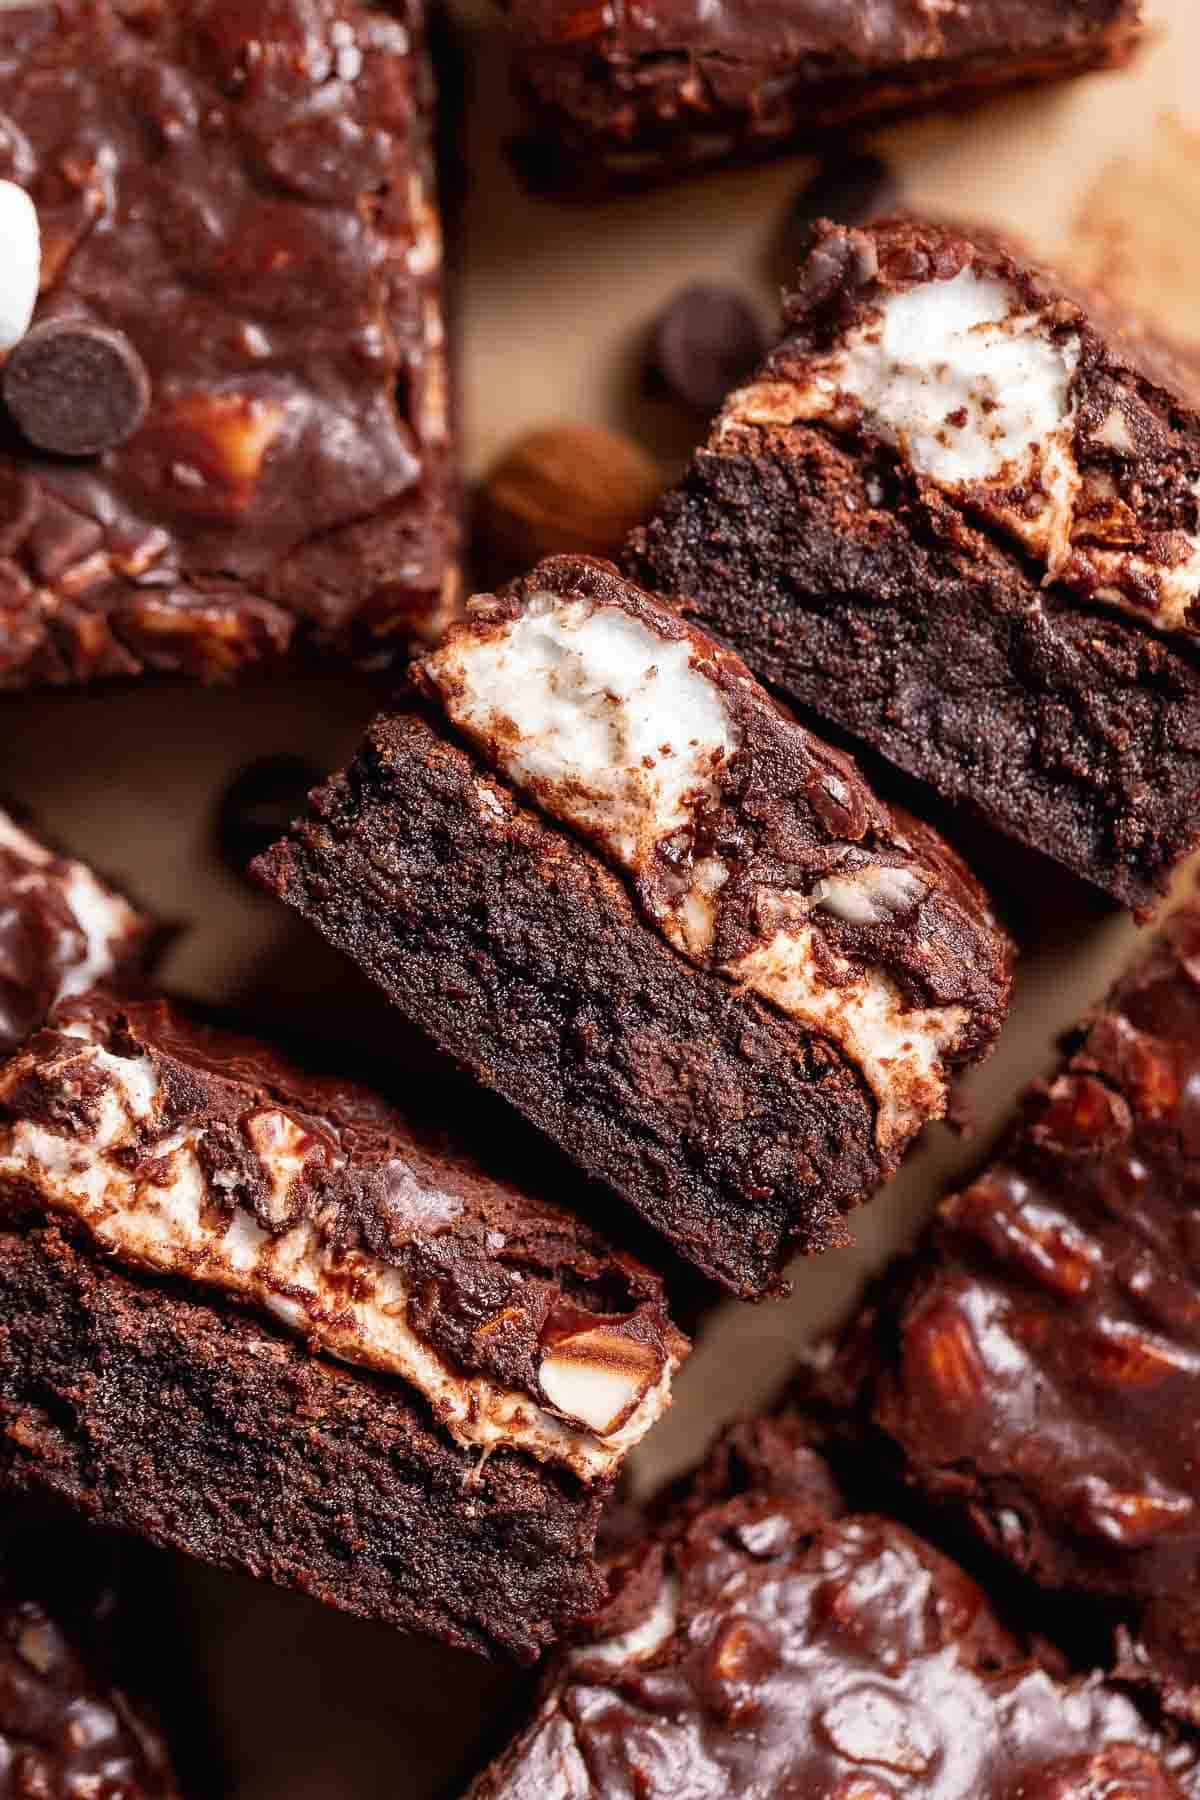 Rocky road brownies on their sides to show the brownie, marshmallow, and almond layers.